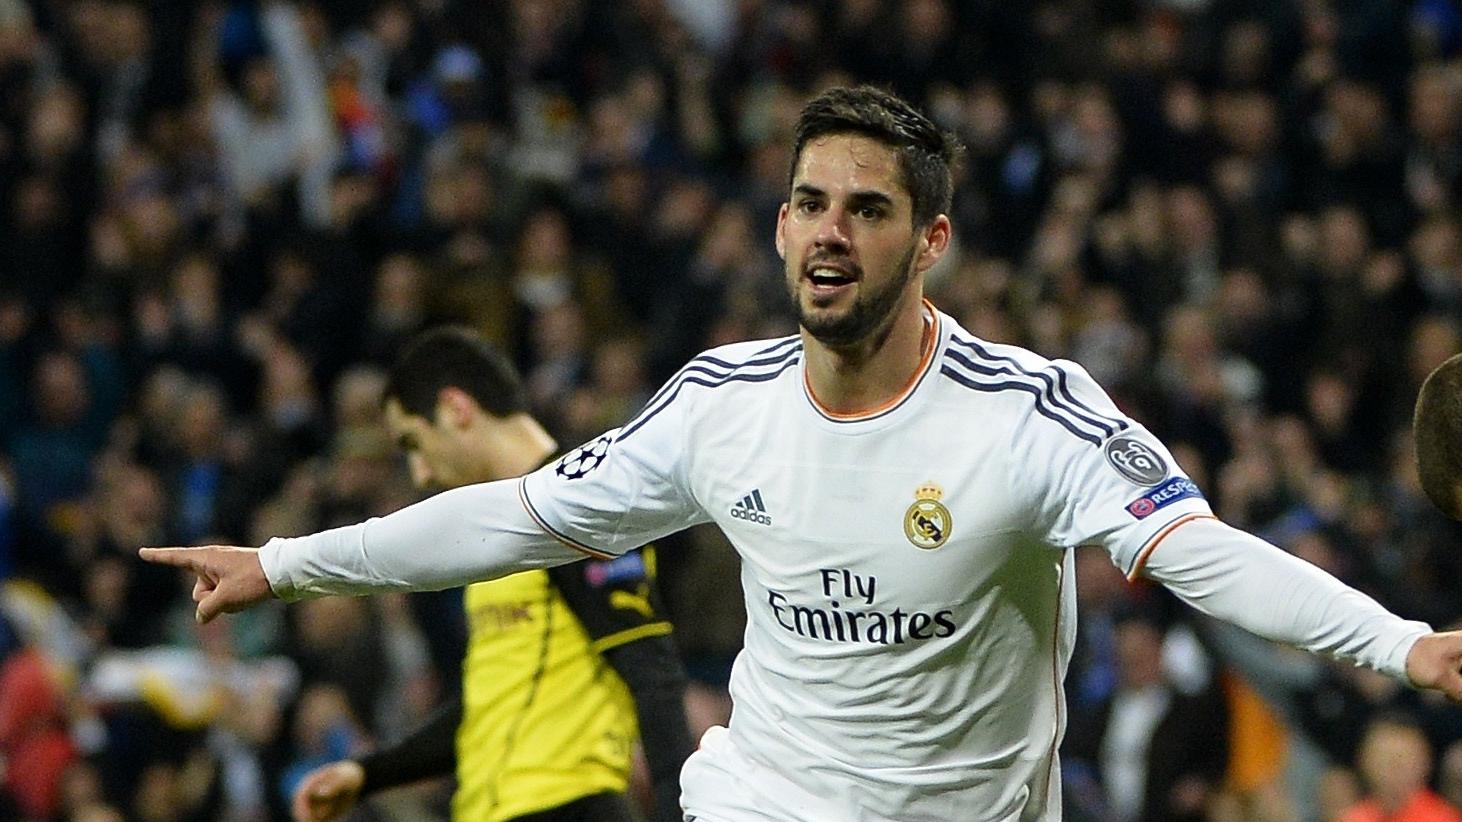 madrid_s_isco_profited_from_angel_di_maria_s_late_withdrawal_against_dortmund.jpeg